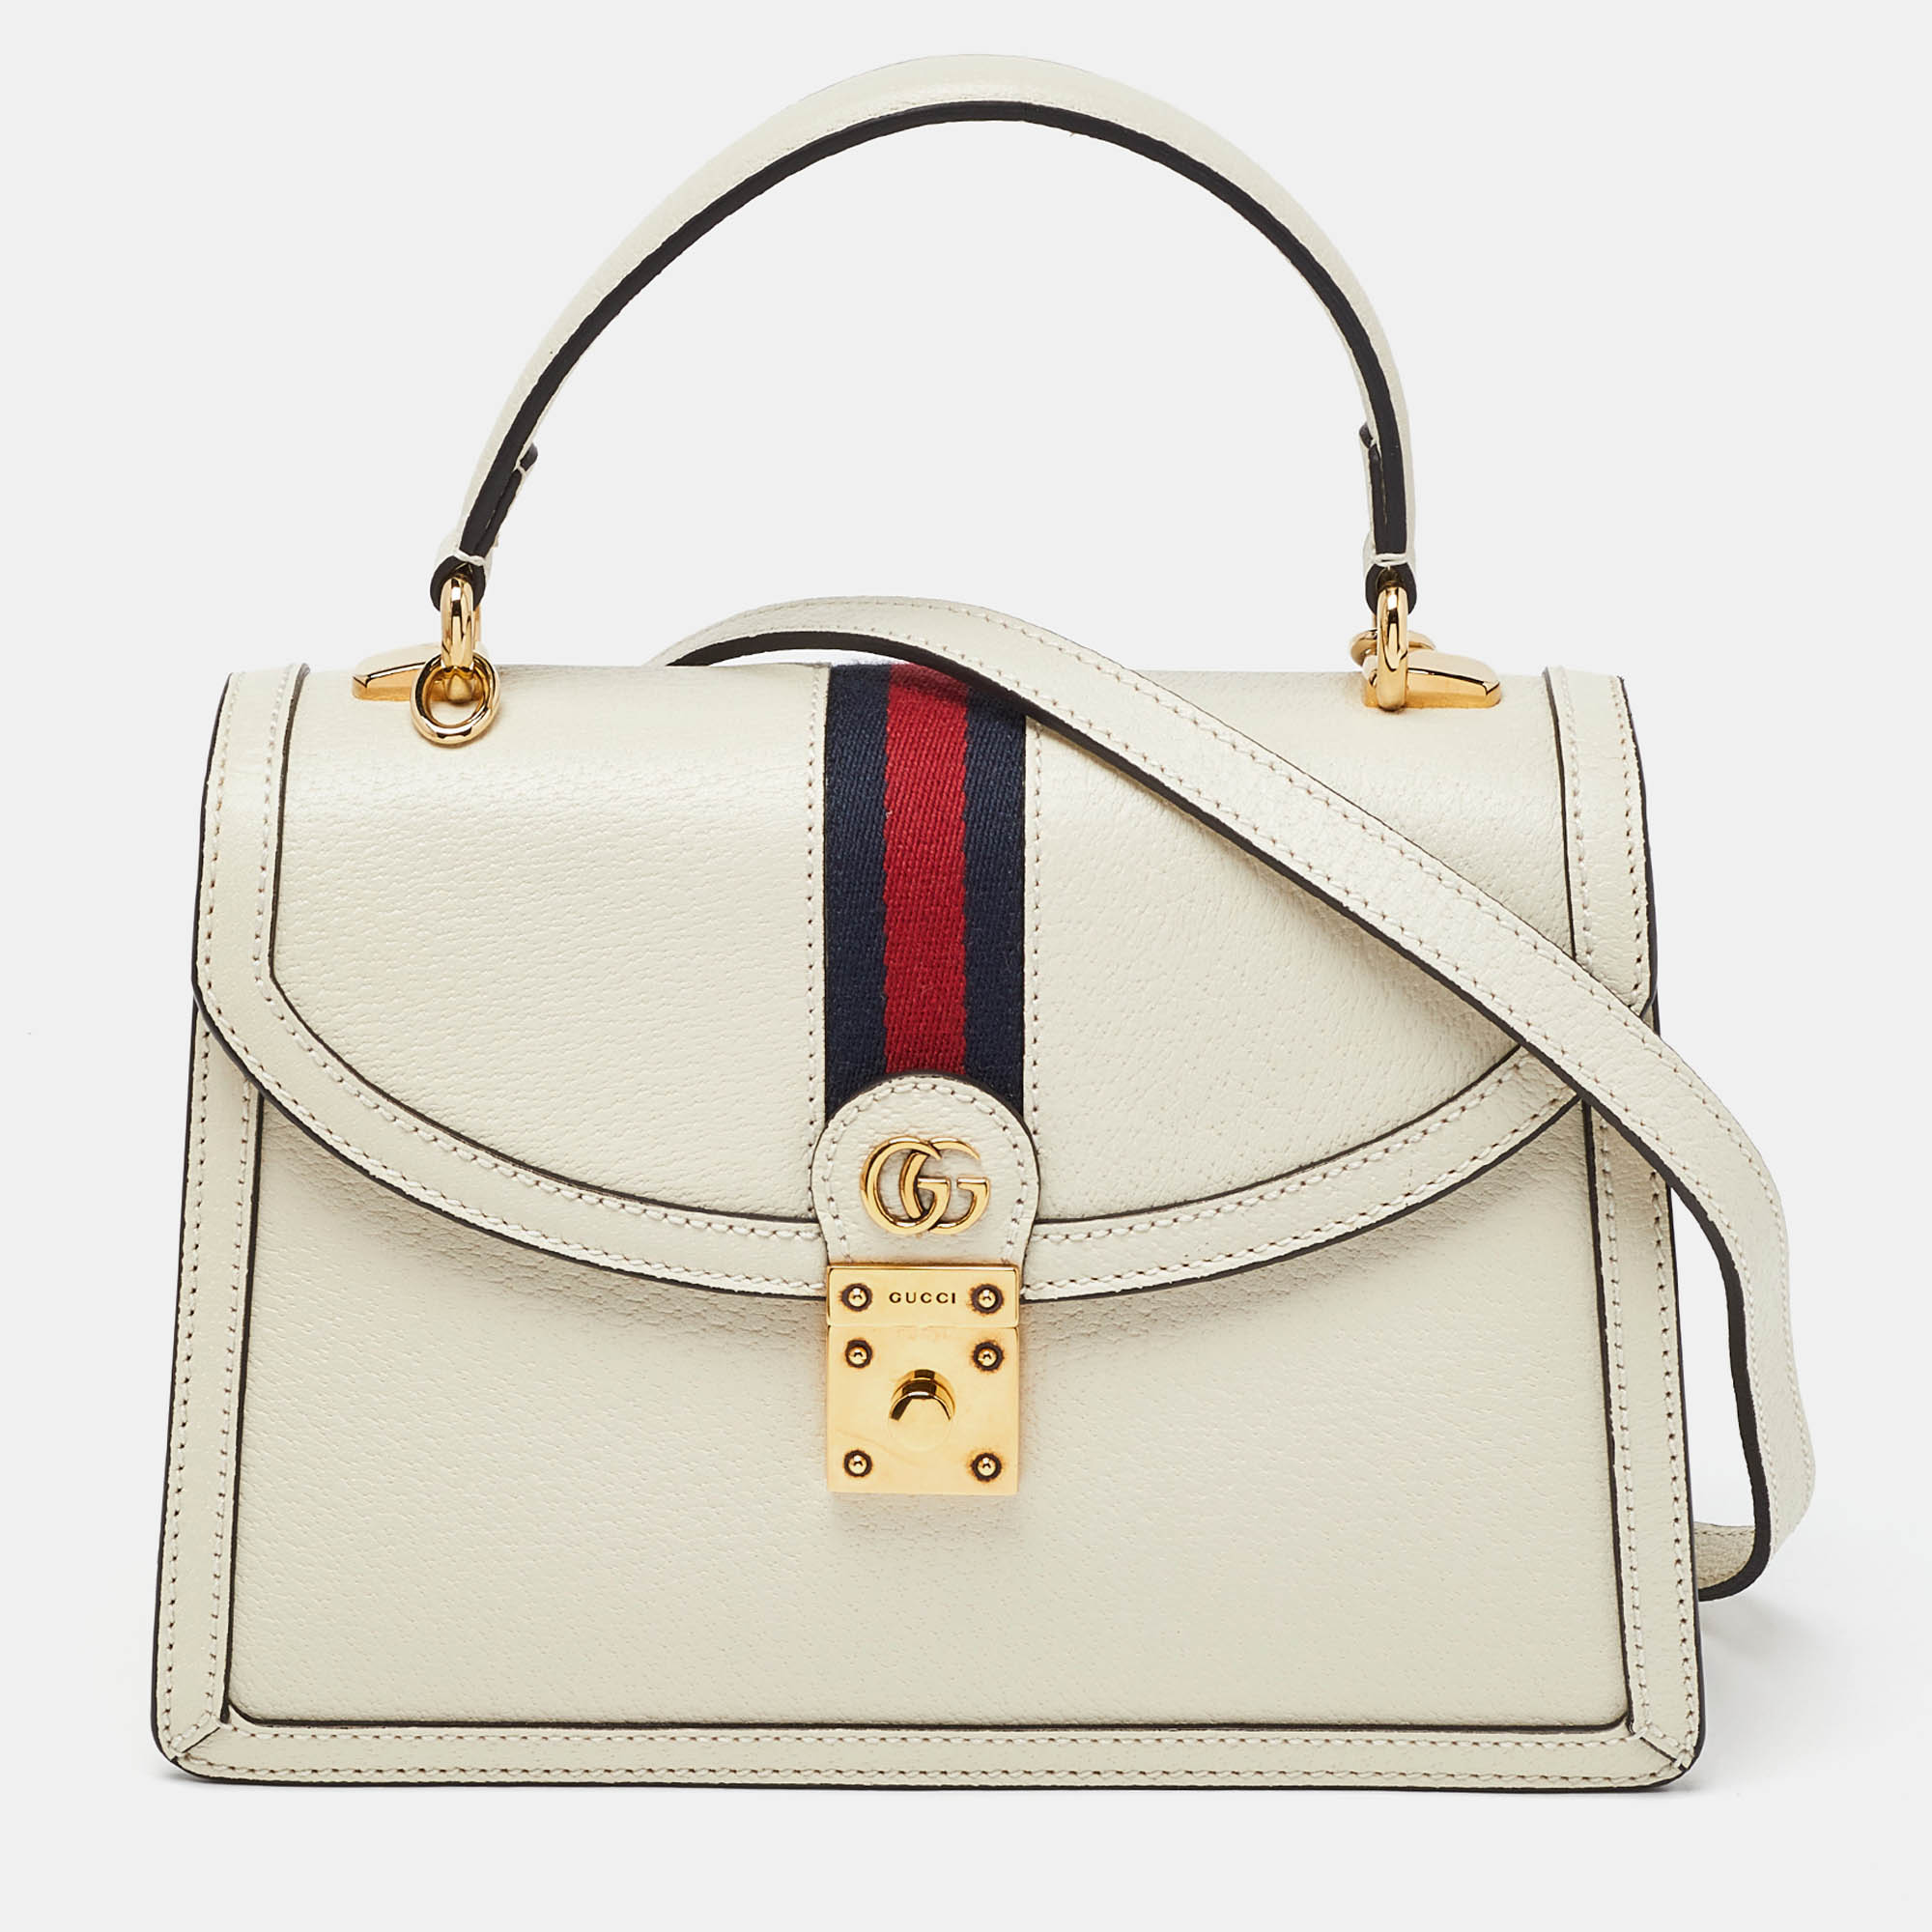 Gucci cream leather small ophidia gg web top handle bag